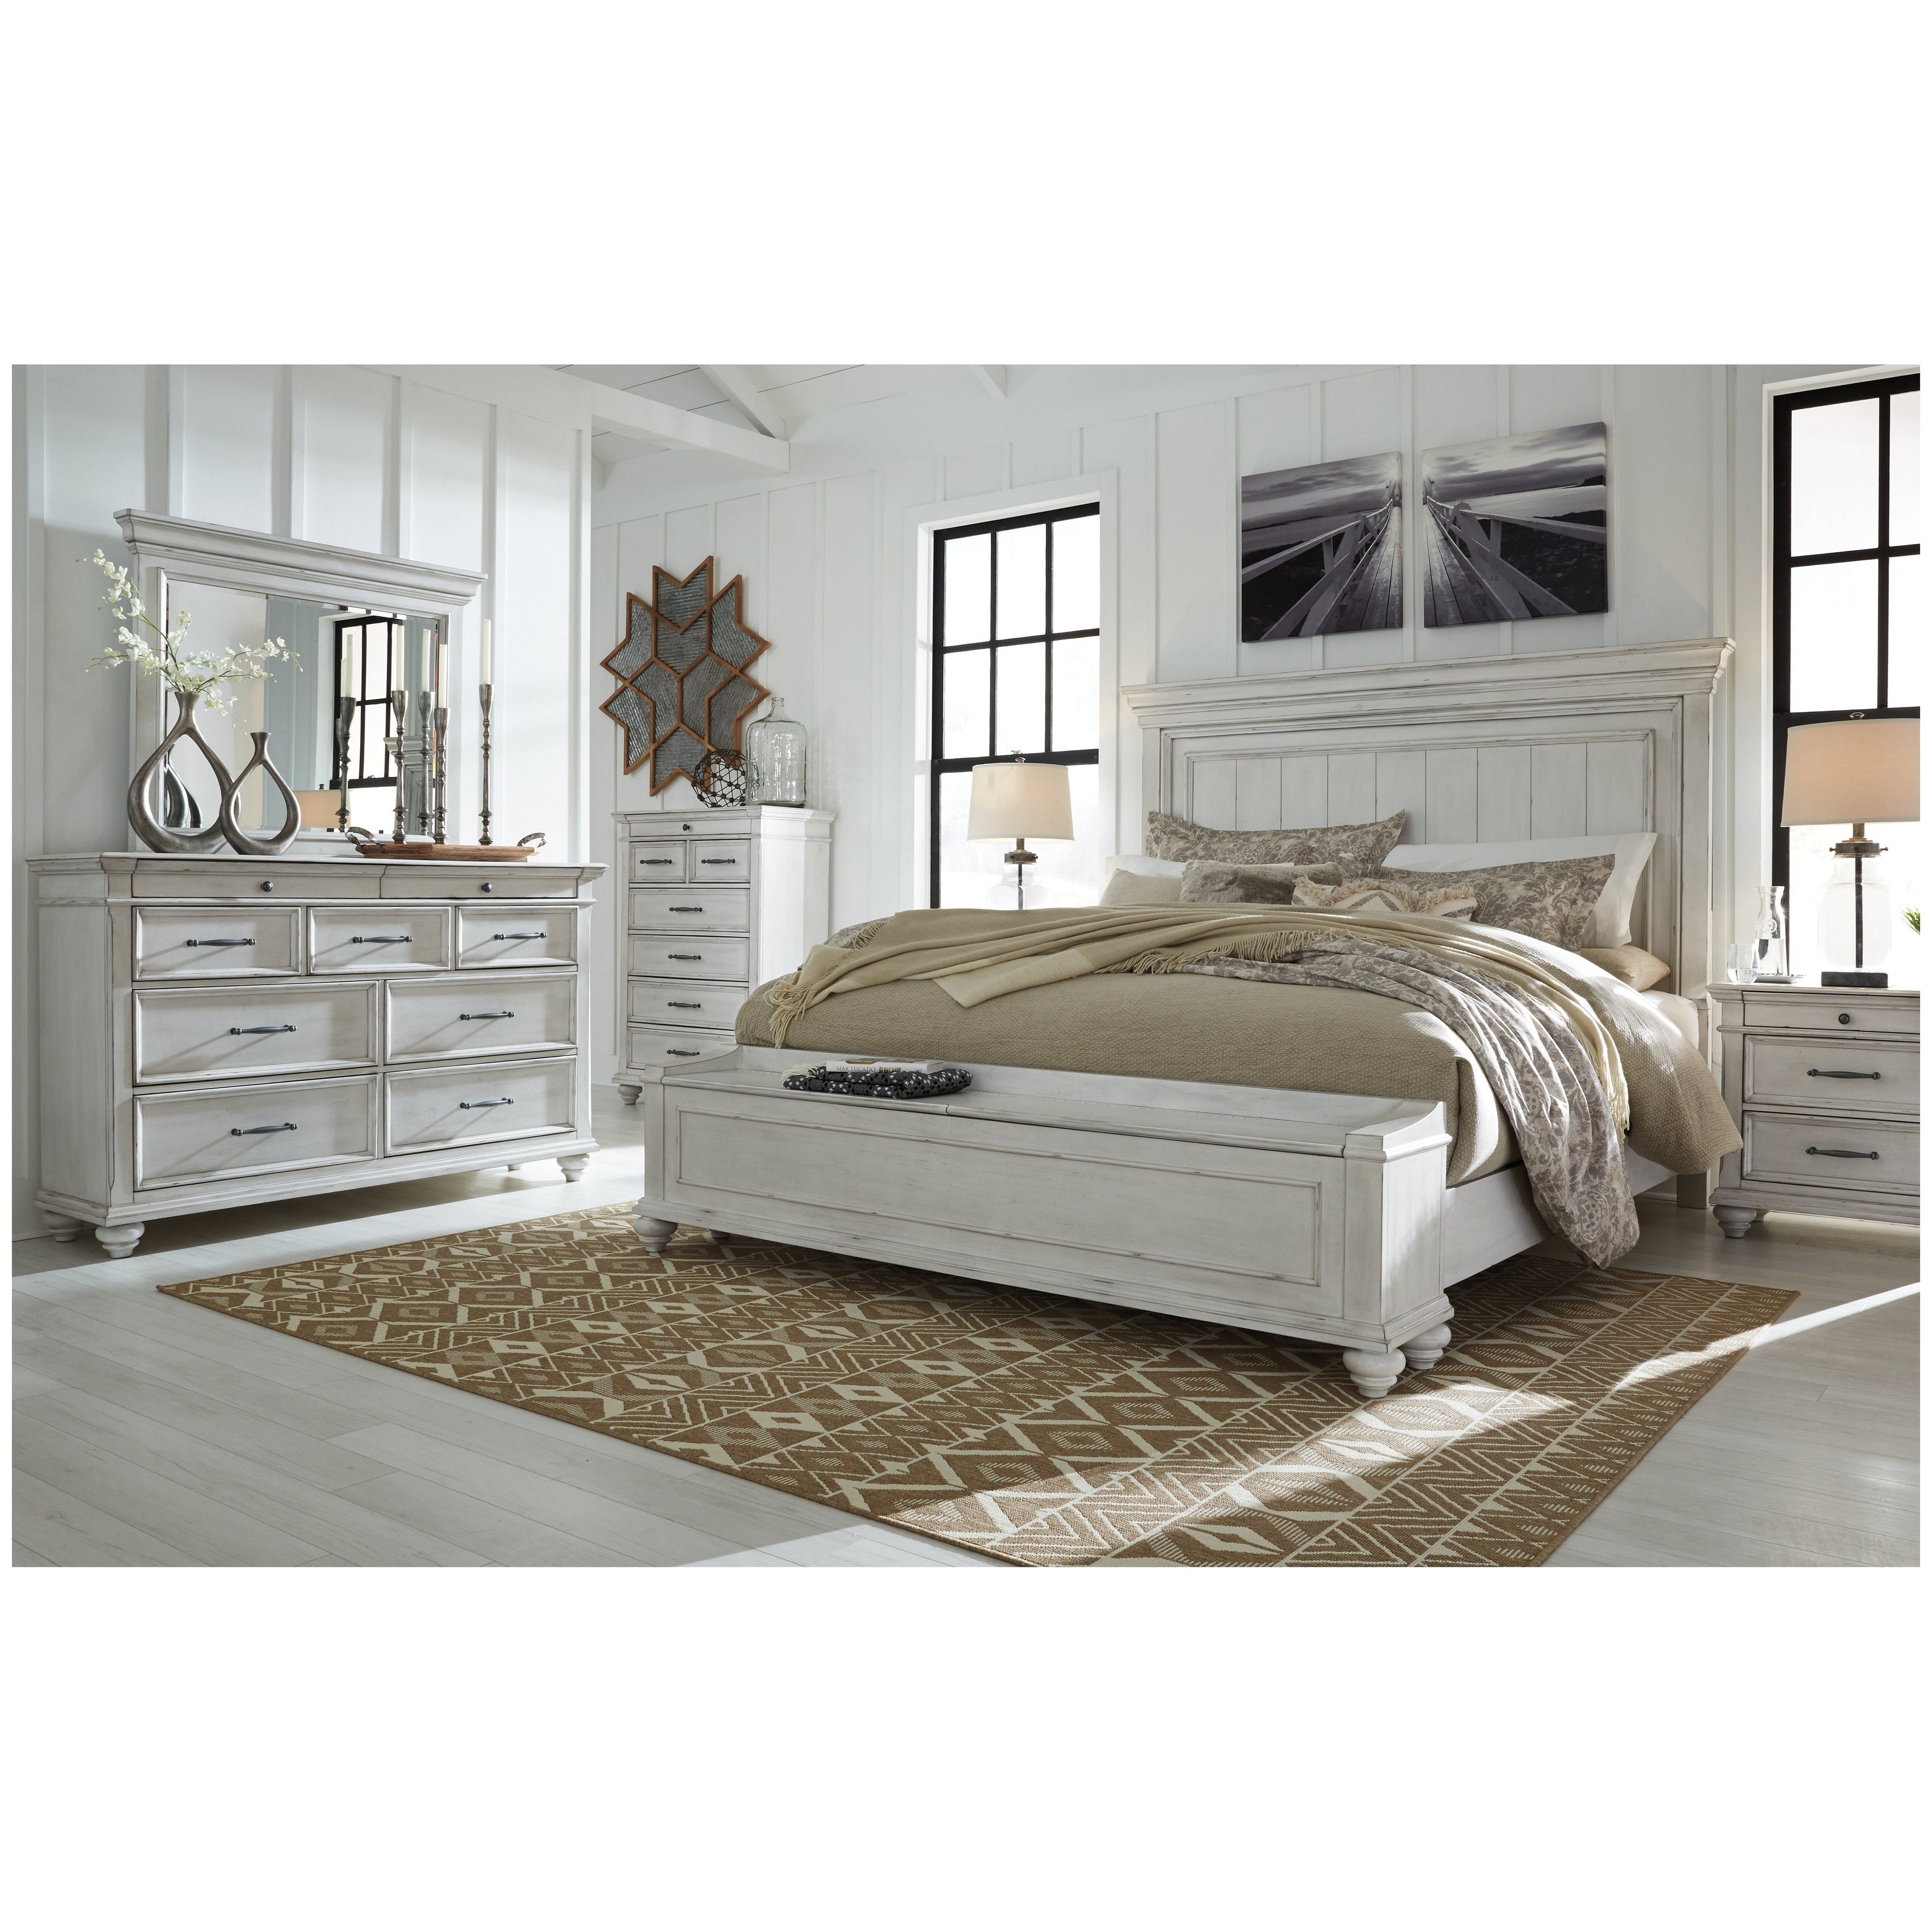 Kanwyn Panel Bed with Storage Bench